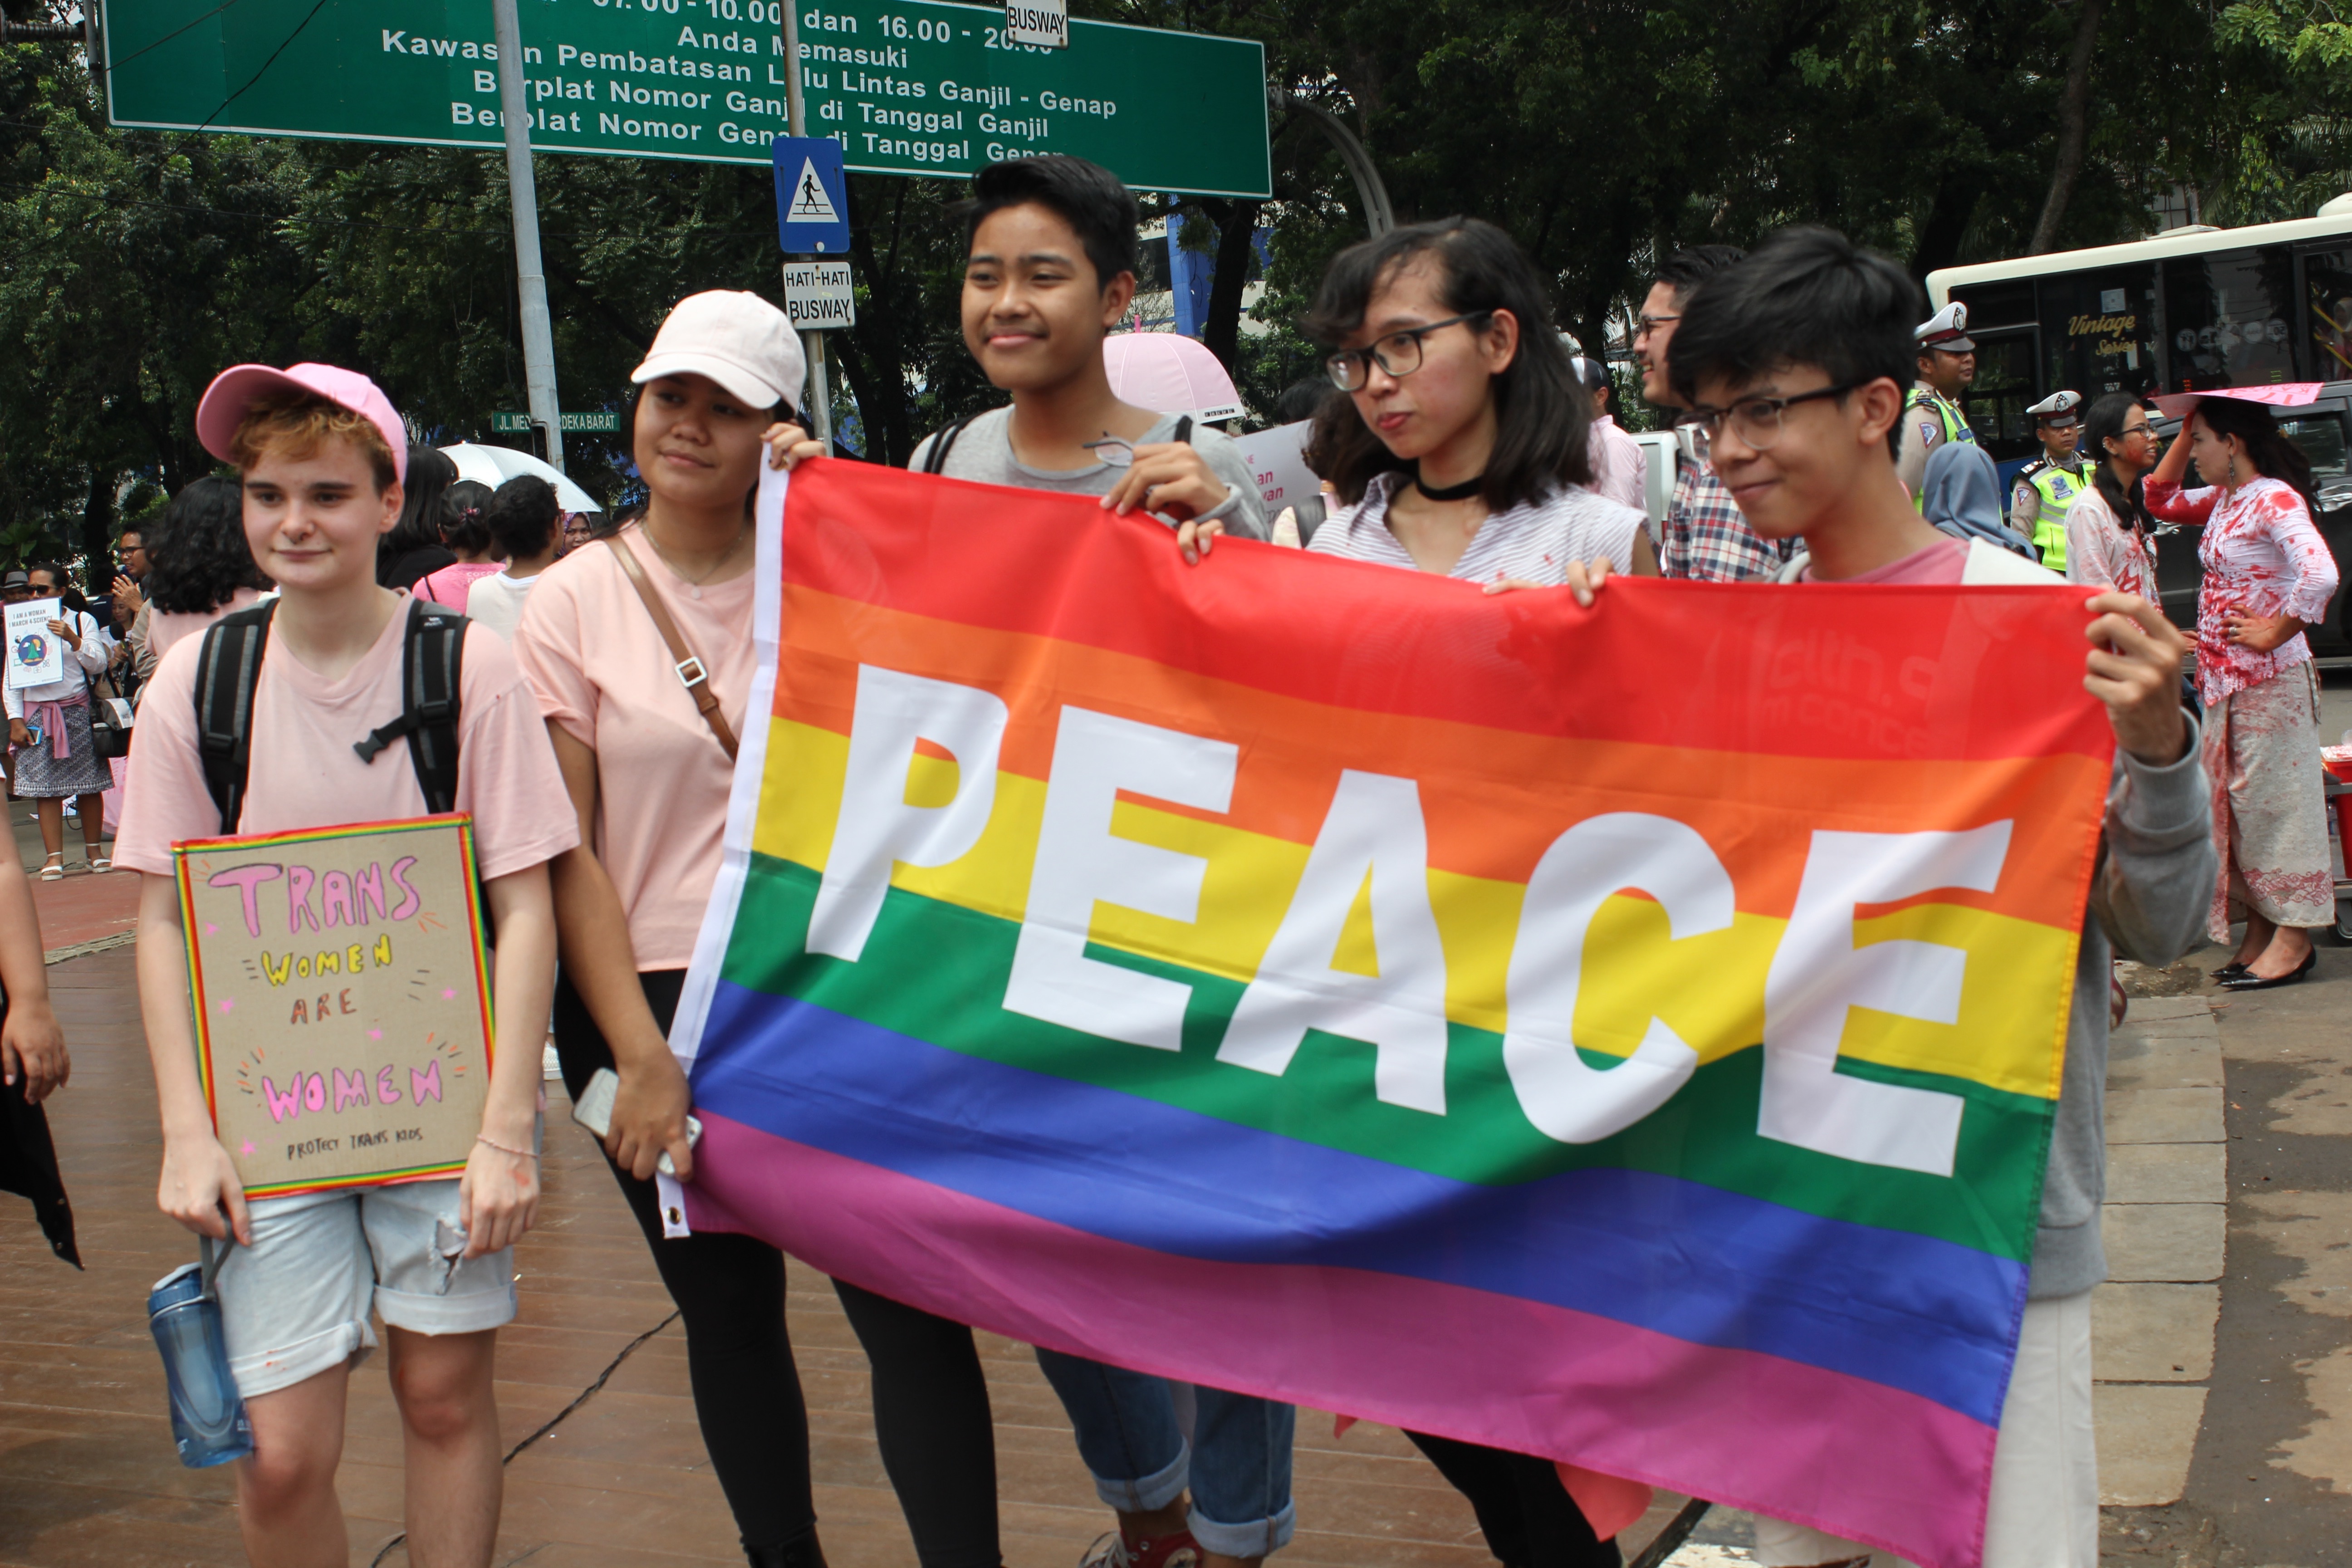 Protesters carrying a pro-LGBT sign during the Jakarta Women's March in 2017. Photo: Coconuts Media / Andra Nasrie